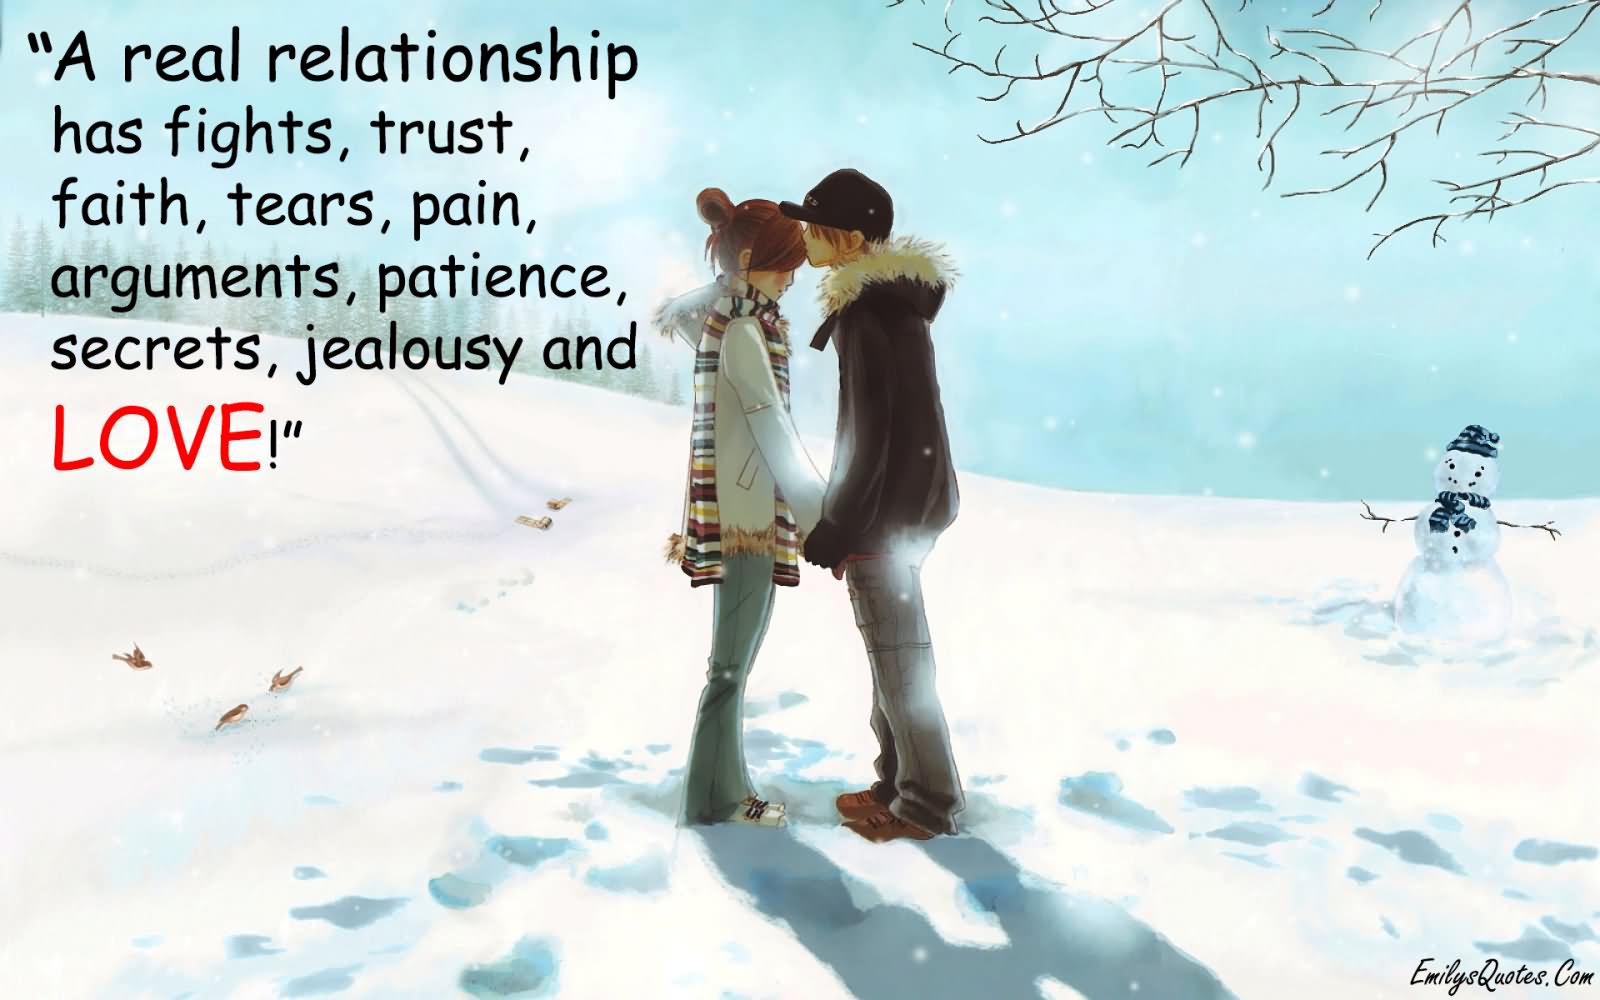 A real relationship has fights, trust, faith, tears, pain, arguments, patience, secrets, jealousy and LOVE